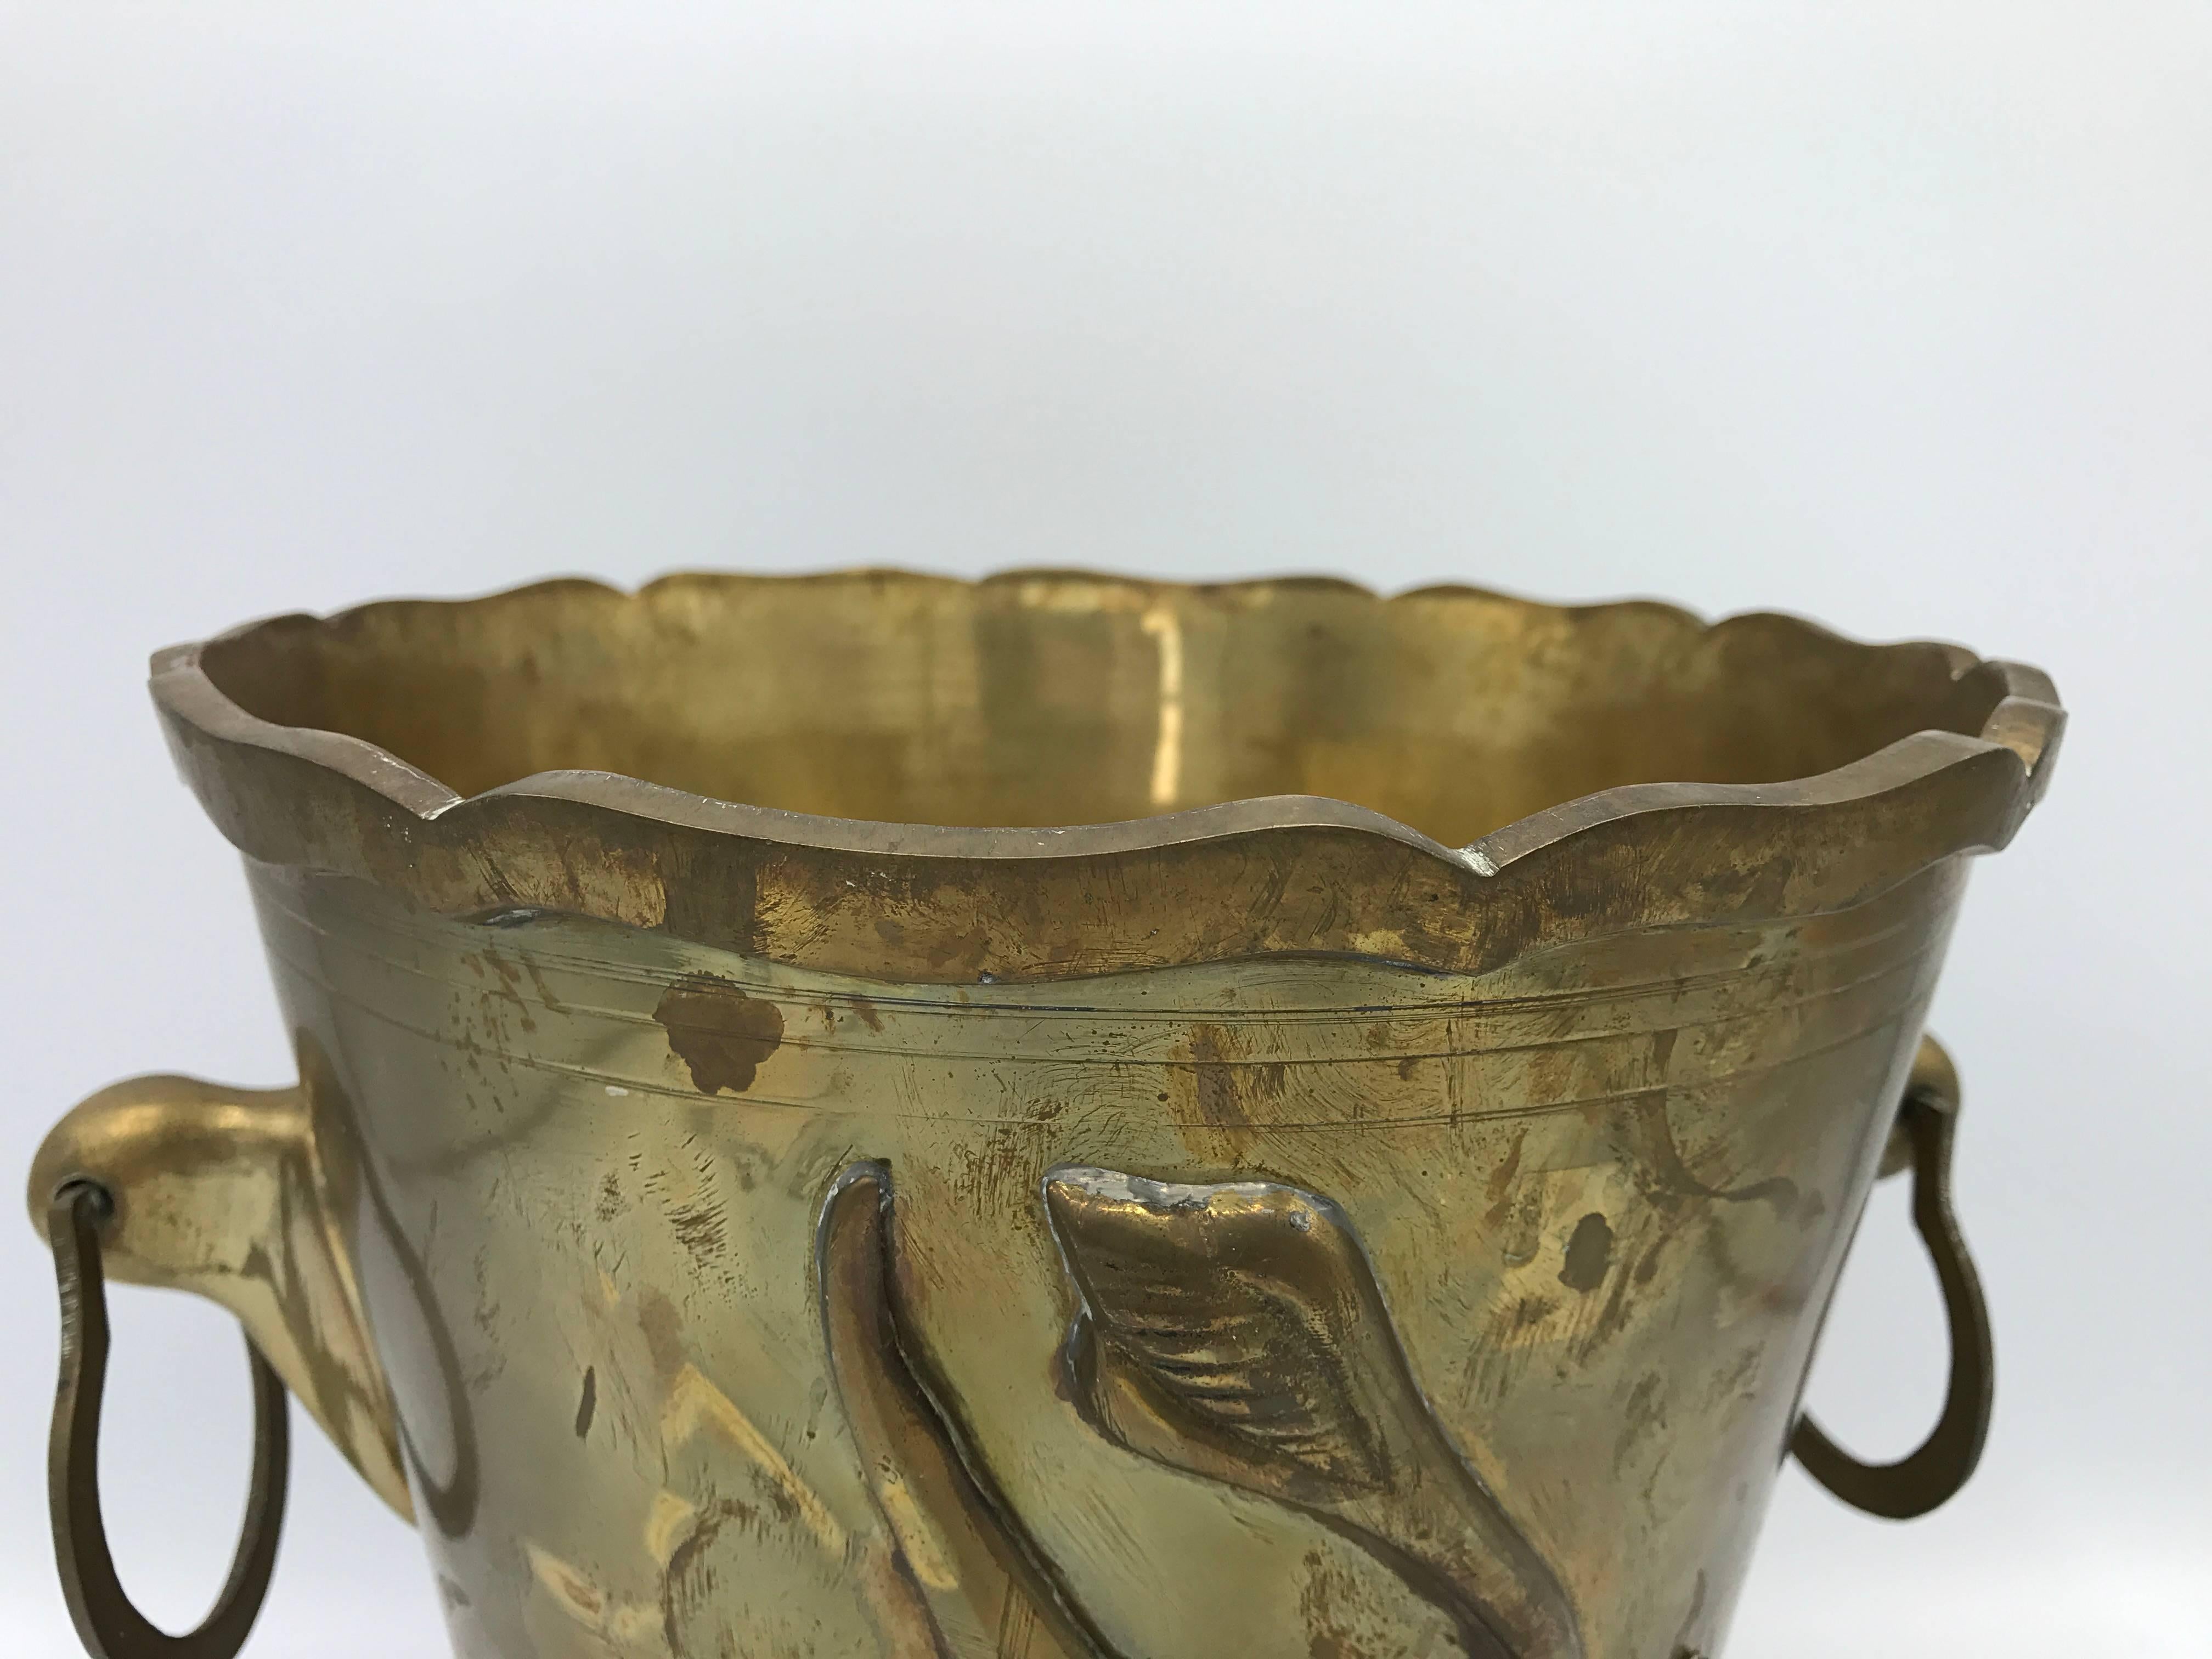 Offered is a gorgeous, 1970s solid-brass Hollywood Regency waste basket with a tulip floral motif on one side. Handles on both sides. Alternatively, can be used as a cachepot or wine chiller. Heavy.